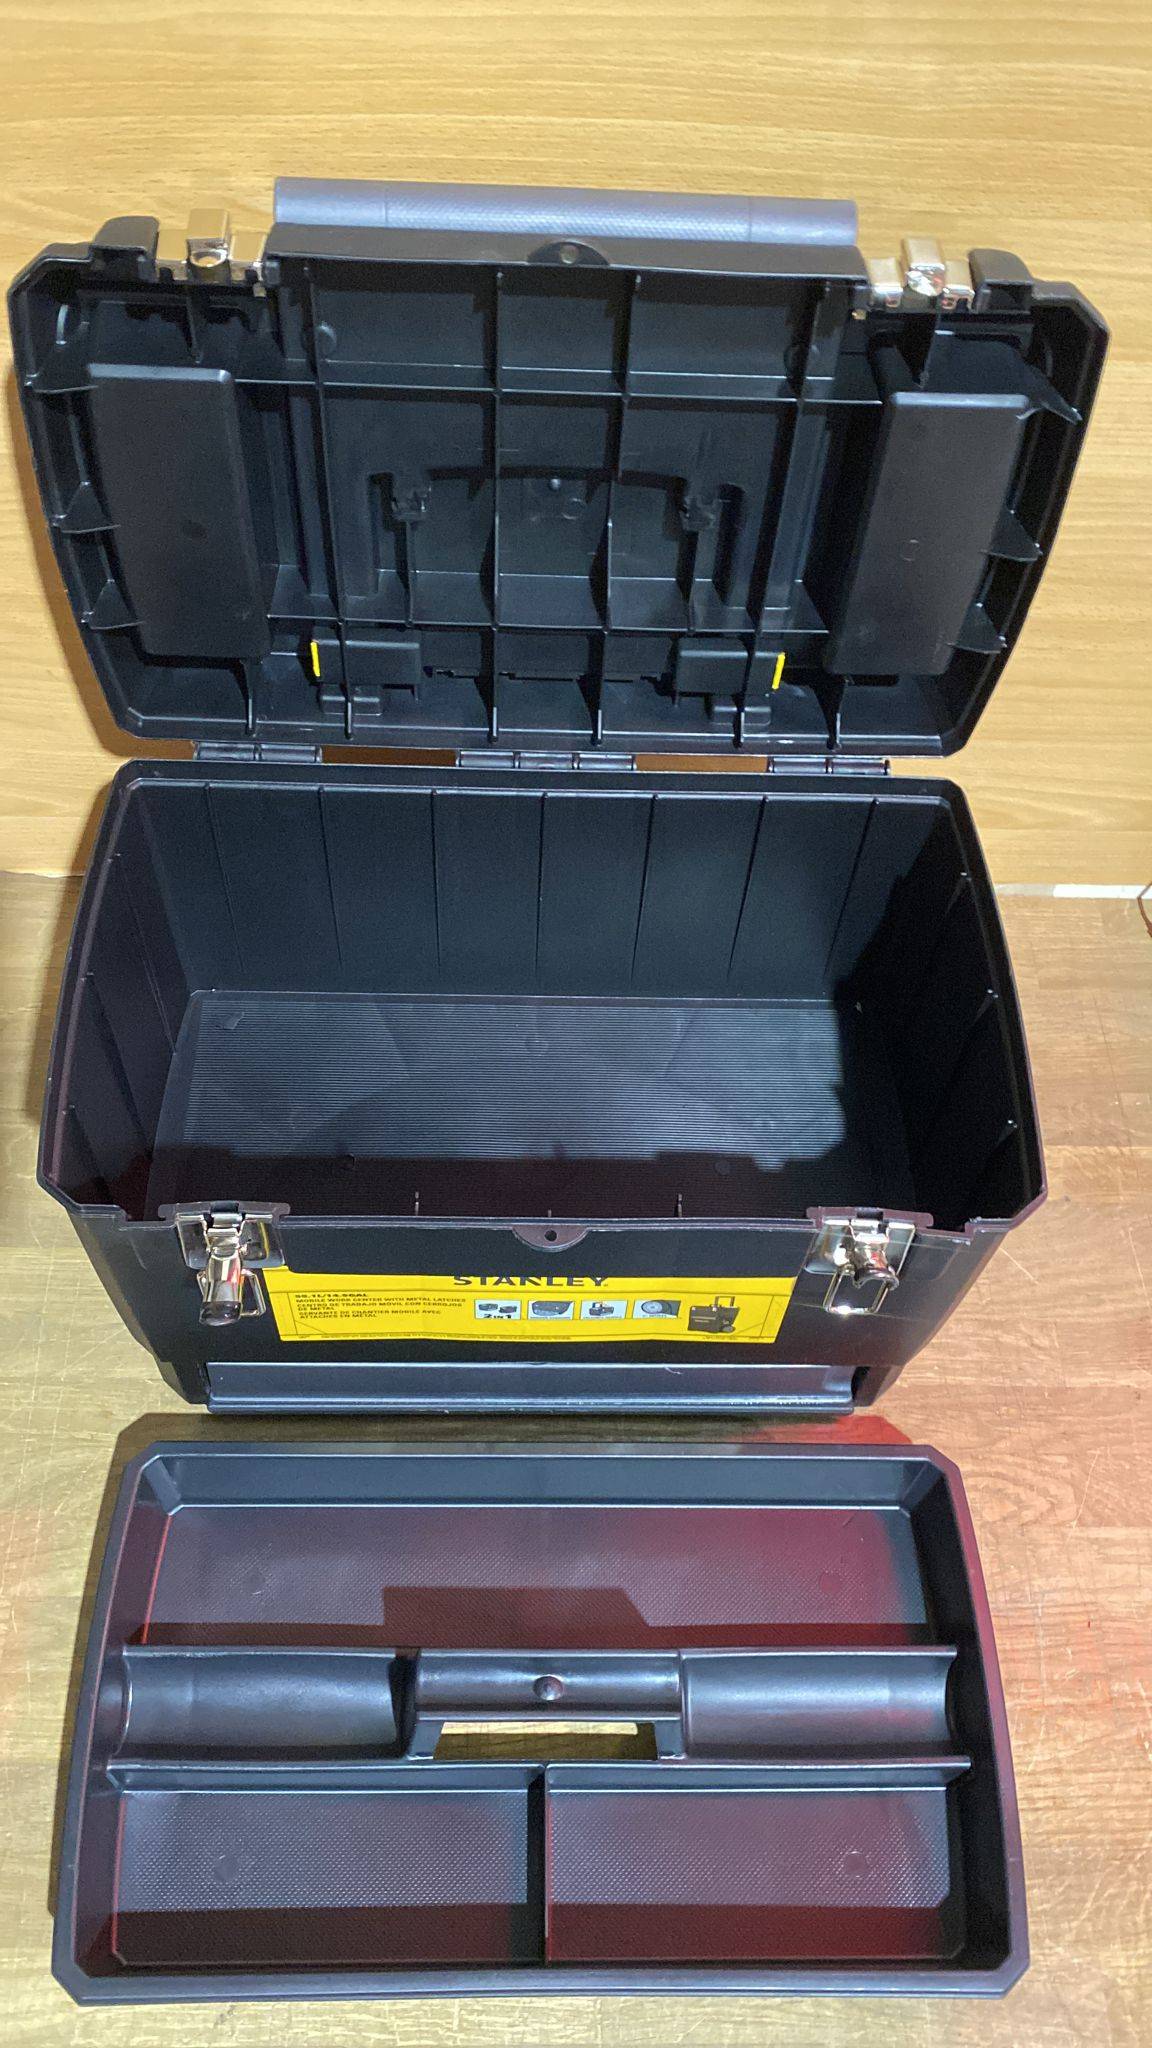 Stanley 4 compartment Mobile work centre 9686